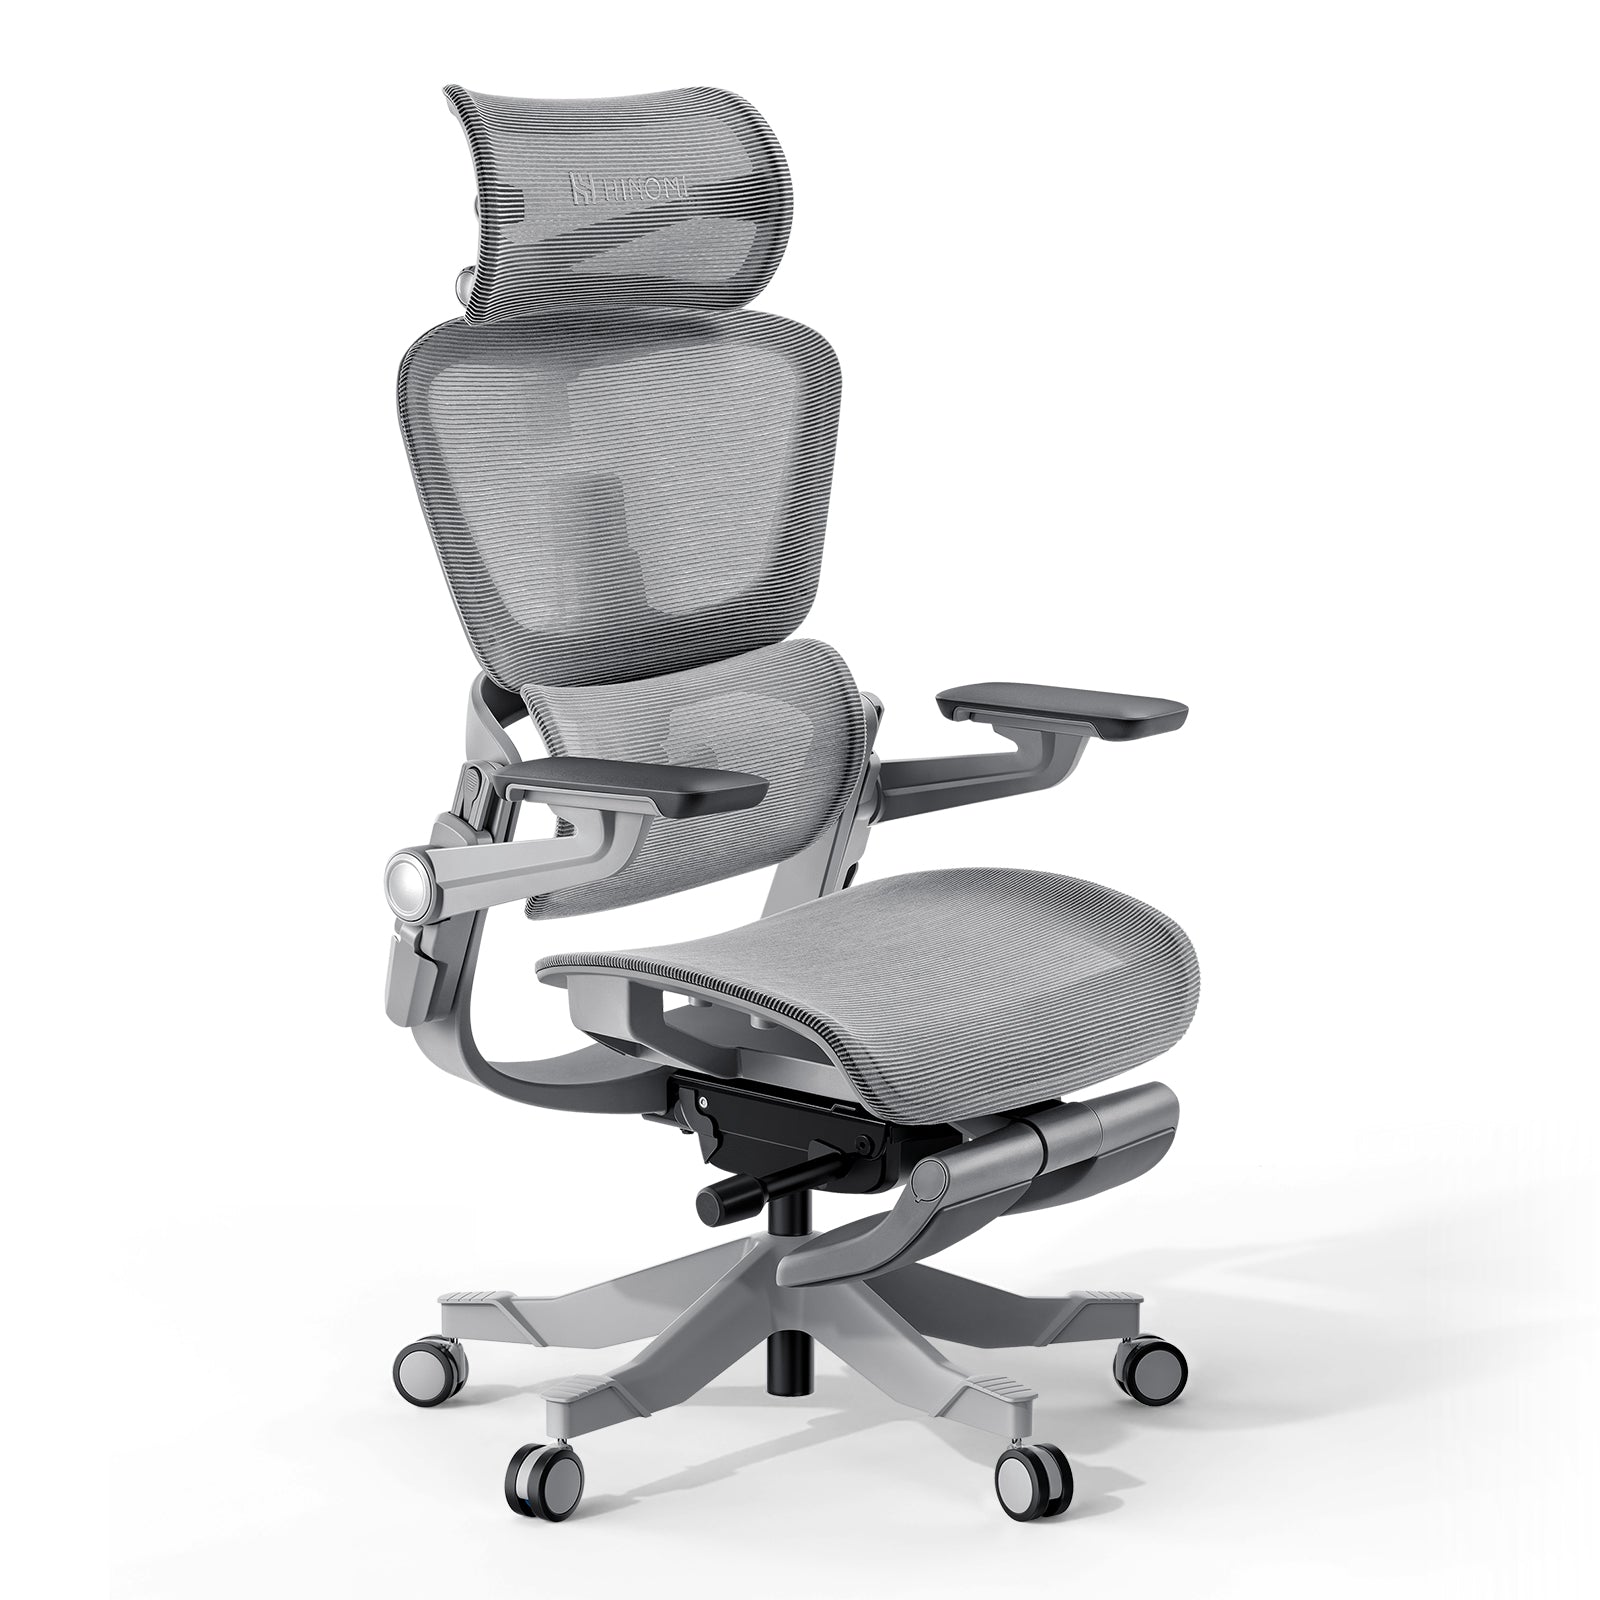  HINOMI H1 Classic V2/V3 Ergonomic Office Chair - Adjustable  Backrest Height, Comfortable for Home & Work, with Flippable 3D Armrests  and Breathable Hybrid Mesh (H1ClsV2) : Home & Kitchen